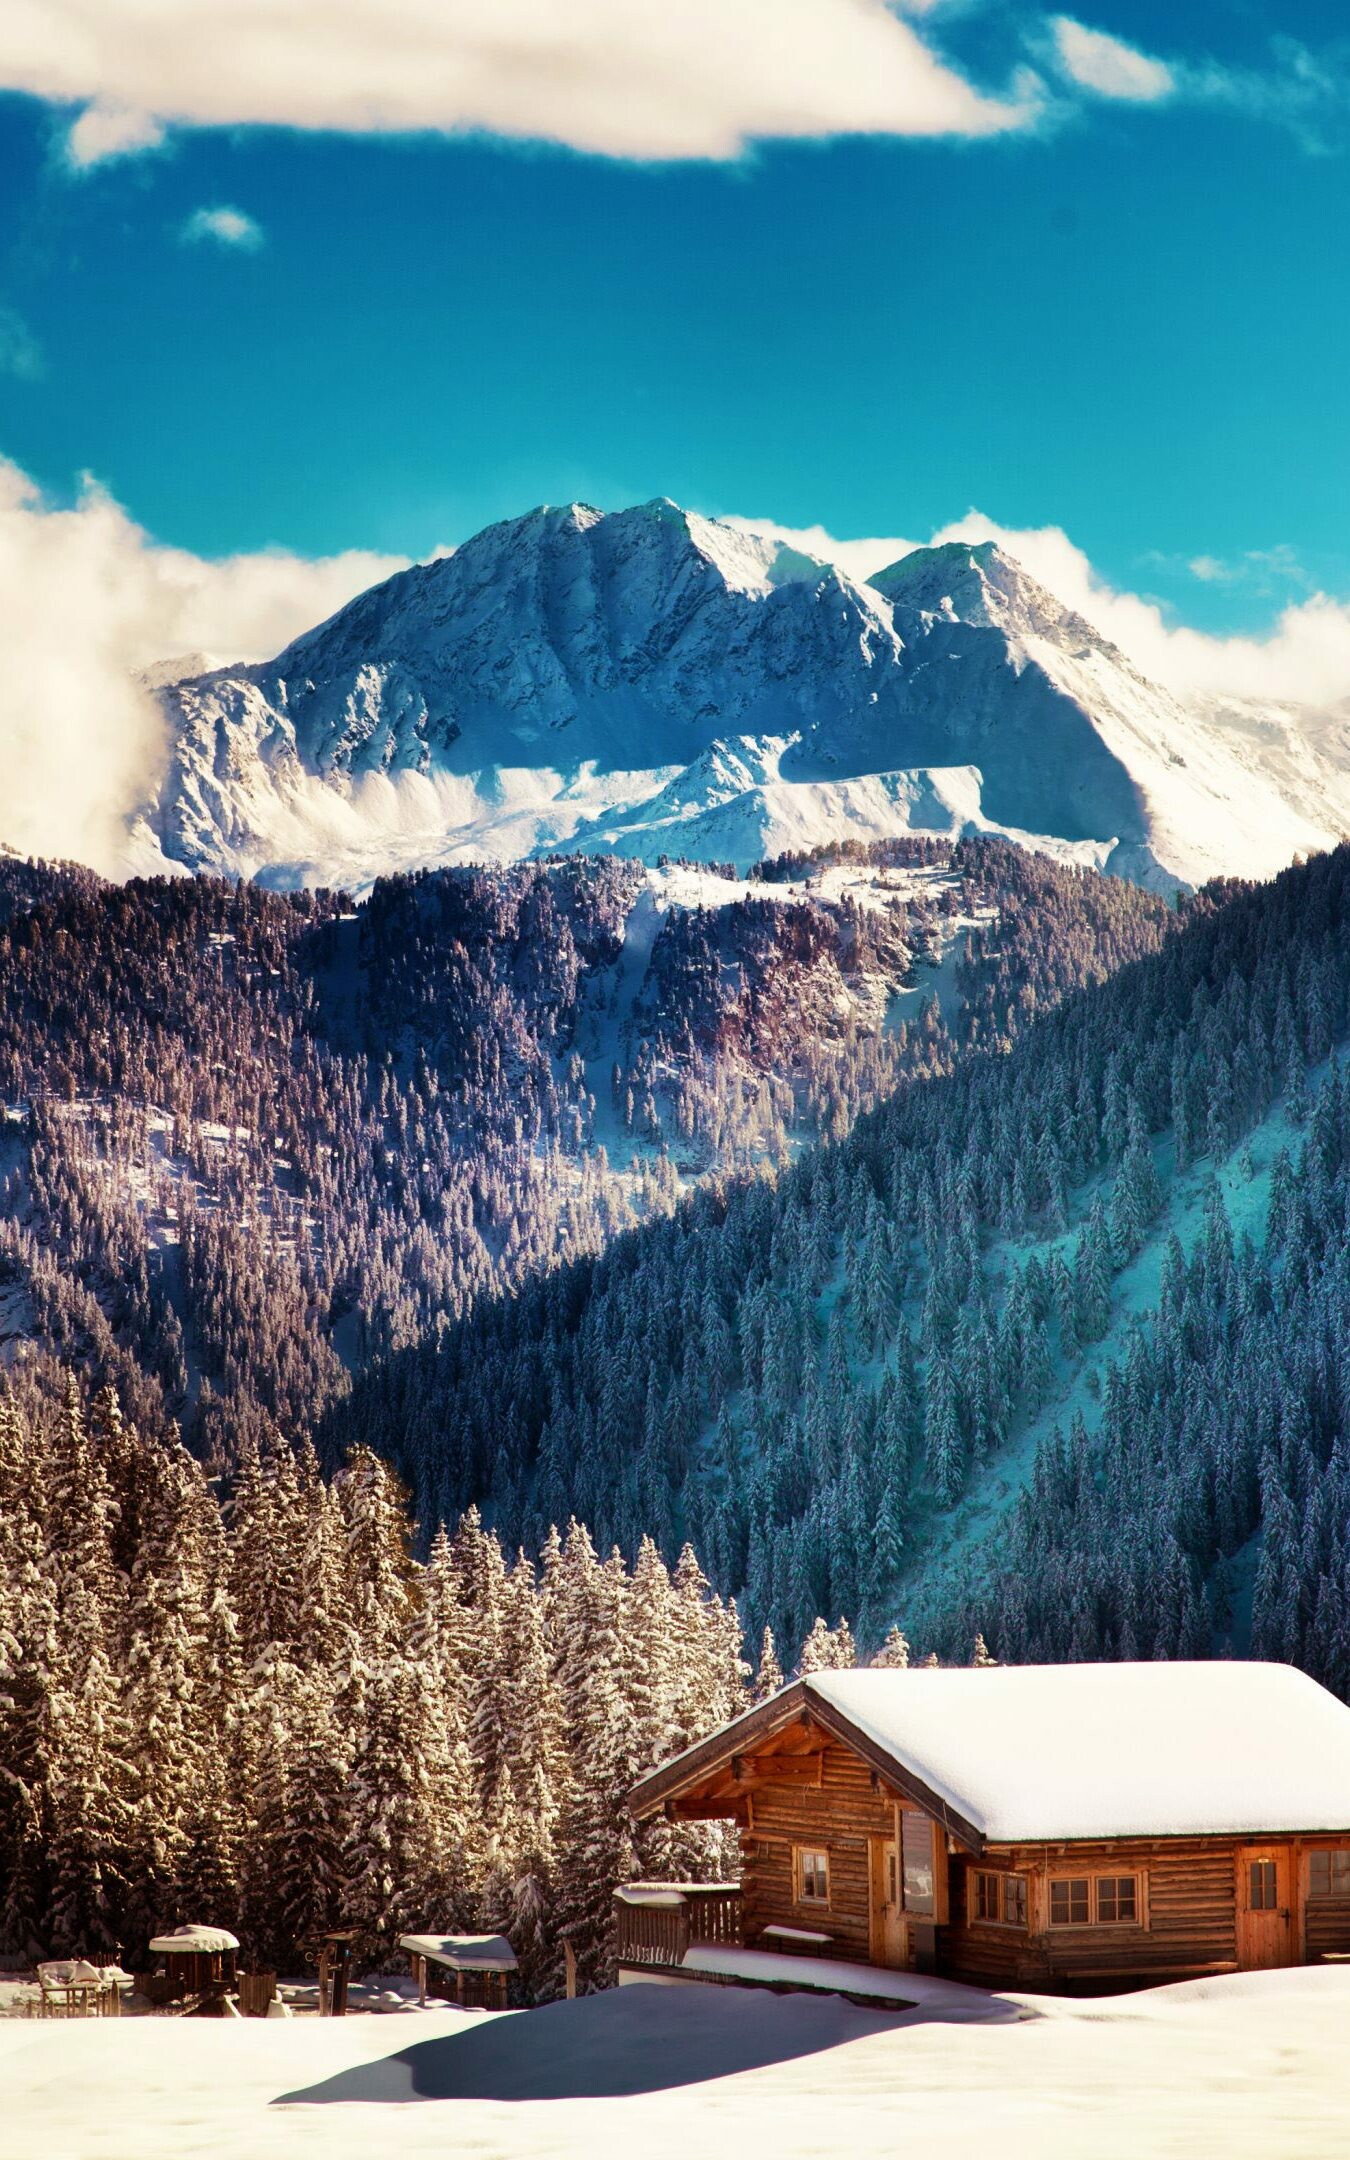 Winter: Snow-capped mountains, Wintry landscape, Chilly. 1350x2160 HD Wallpaper.